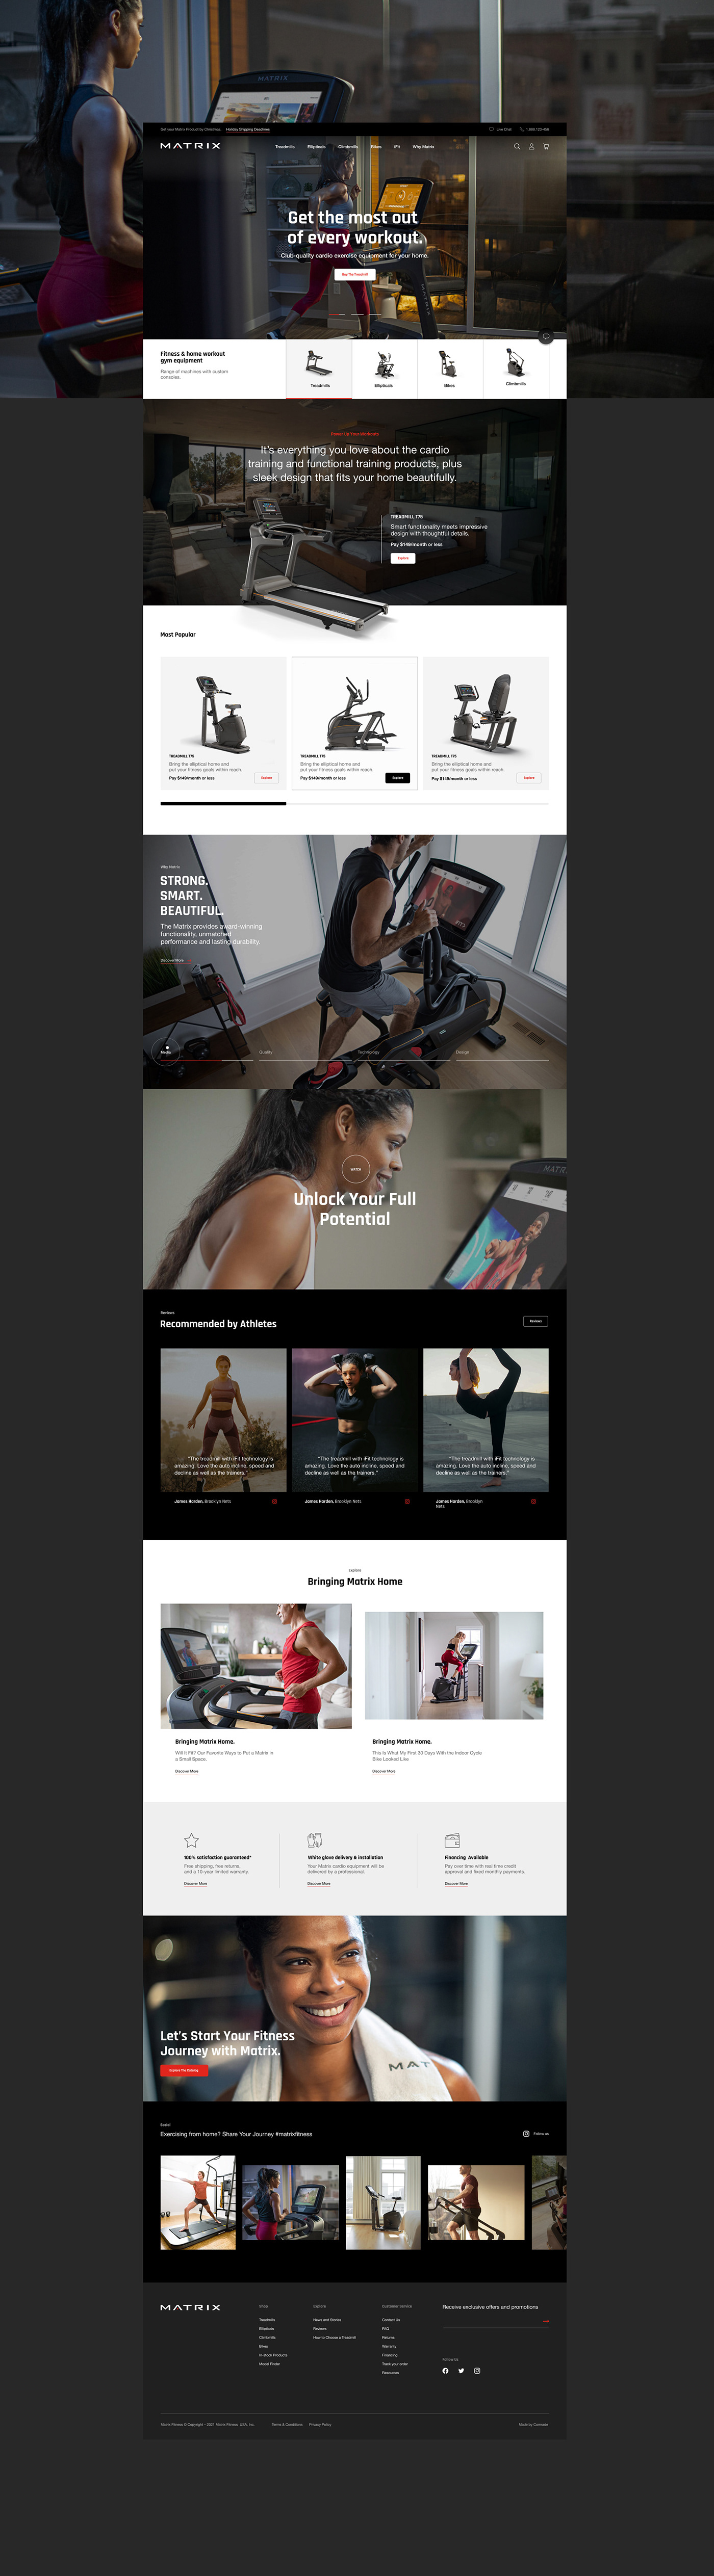 clean e-commerce fitness gym Shopify